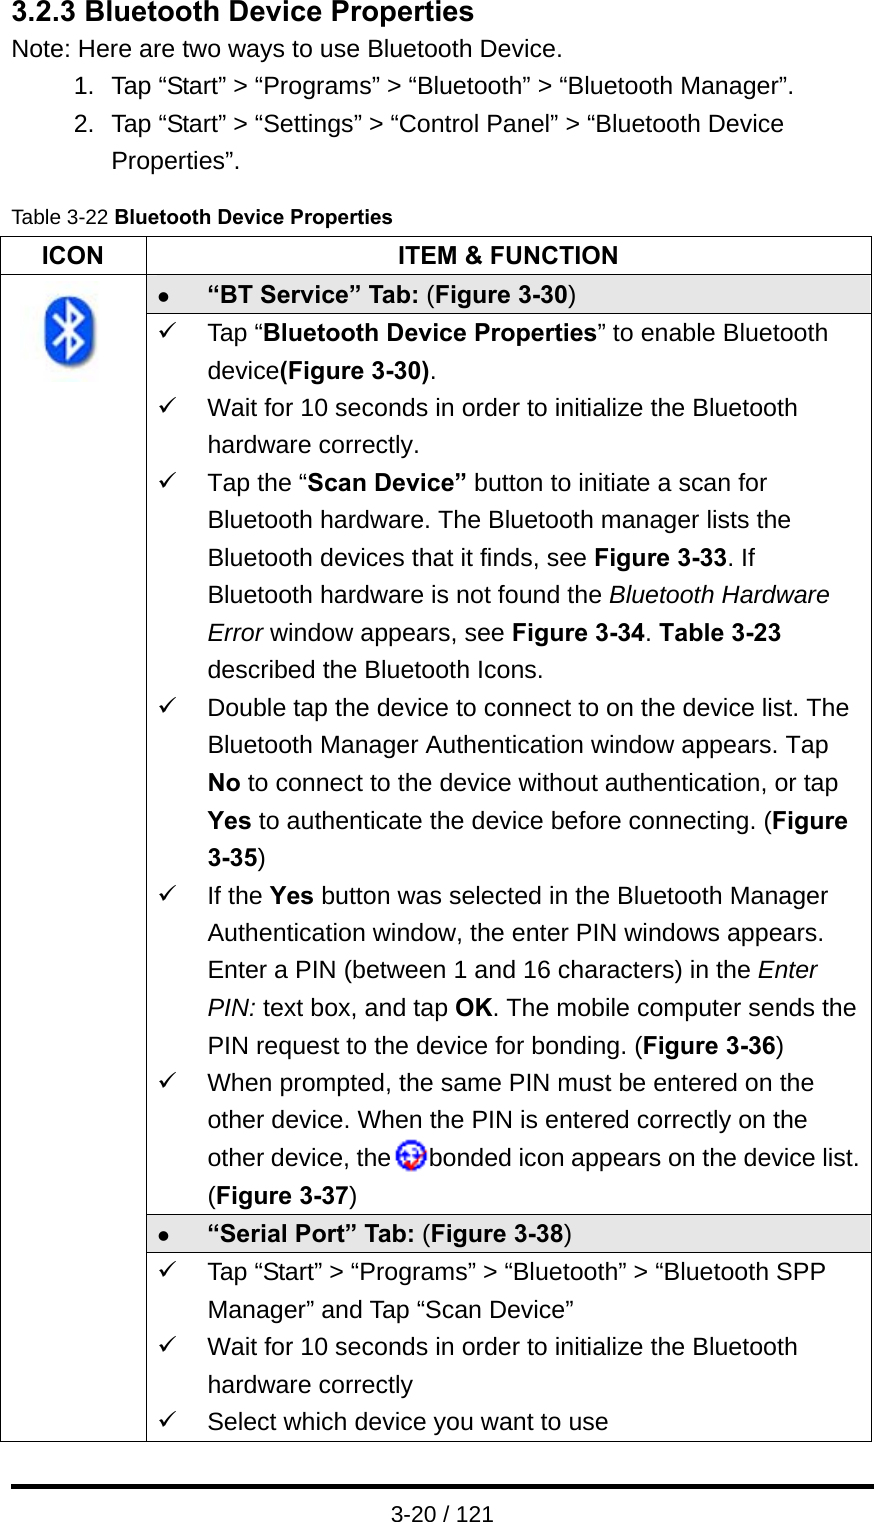  3-20 / 121 3.2.3 Bluetooth Device Properties Note: Here are two ways to use Bluetooth Device. 1.  Tap “Start” &gt; “Programs” &gt; “Bluetooth” &gt; “Bluetooth Manager”. 2.  Tap “Start” &gt; “Settings” &gt; “Control Panel” &gt; “Bluetooth Device Properties”. Table 3-22 Bluetooth Device Properties ICON  ITEM &amp; FUNCTION z “BT Service” Tab: (Figure 3-30) 9 Tap “Bluetooth Device Properties” to enable Bluetooth device(Figure 3-30). 9  Wait for 10 seconds in order to initialize the Bluetooth hardware correctly. 9  Tap the “Scan Device” button to initiate a scan for Bluetooth hardware. The Bluetooth manager lists the Bluetooth devices that it finds, see Figure 3-33. If Bluetooth hardware is not found the Bluetooth Hardware Error window appears, see Figure 3-34. Table 3-23 described the Bluetooth Icons. 9  Double tap the device to connect to on the device list. The Bluetooth Manager Authentication window appears. Tap No to connect to the device without authentication, or tap Yes to authenticate the device before connecting. (Figure 3-35) 9 If the Yes button was selected in the Bluetooth Manager Authentication window, the enter PIN windows appears. Enter a PIN (between 1 and 16 characters) in the Enter PIN: text box, and tap OK. The mobile computer sends the PIN request to the device for bonding. (Figure 3-36) 9  When prompted, the same PIN must be entered on the other device. When the PIN is entered correctly on the other device, the   bonded icon appears on the device list. (Figure 3-37) z “Serial Port” Tab: (Figure 3-38)  9  Tap “Start” &gt; “Programs” &gt; “Bluetooth” &gt; “Bluetooth SPP Manager” and Tap “Scan Device” 9  Wait for 10 seconds in order to initialize the Bluetooth hardware correctly 9  Select which device you want to use 